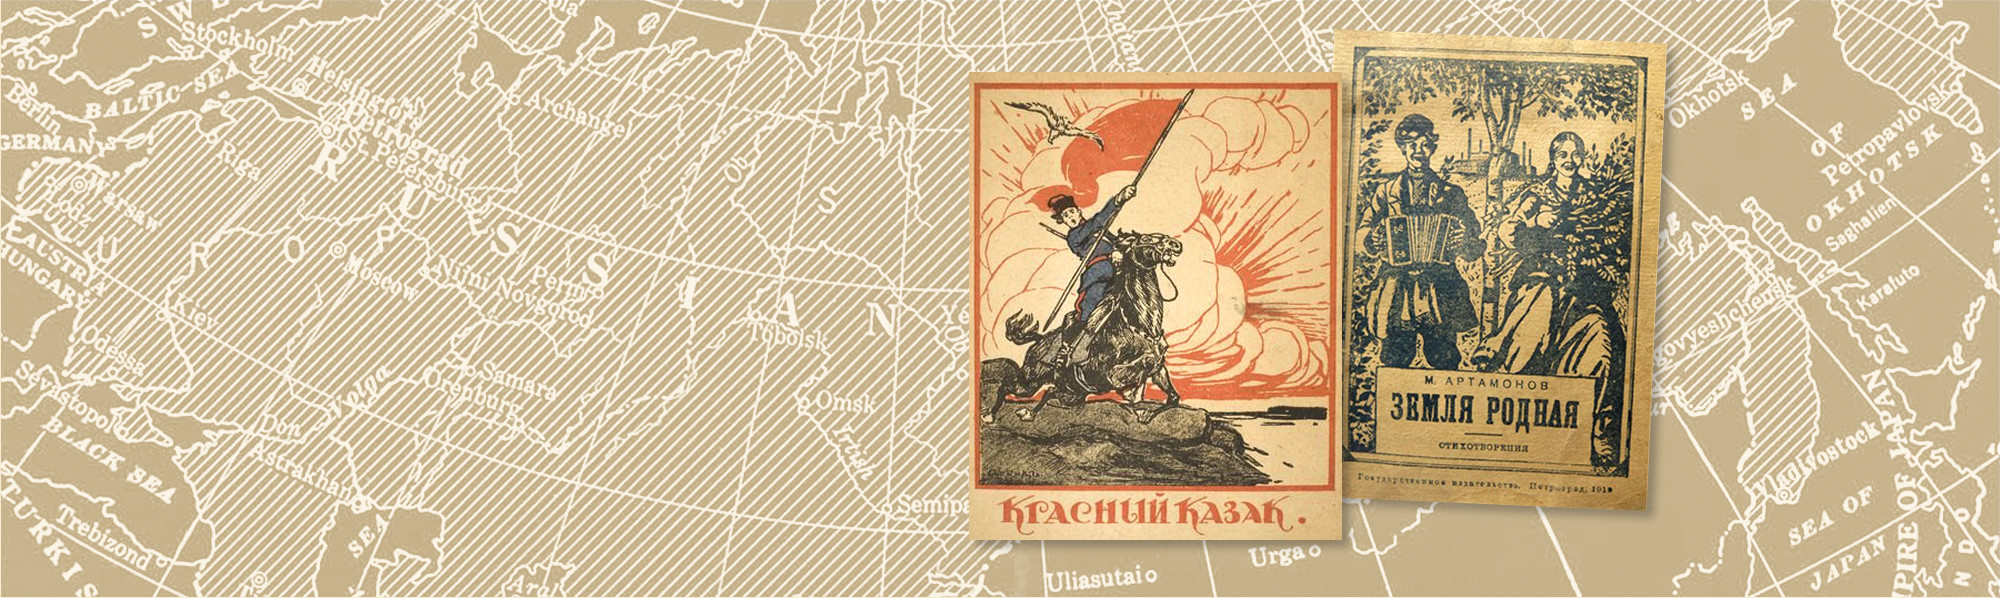 Background: vintage map of Russia. Foreground: two book covers with titles in Cyrillic.